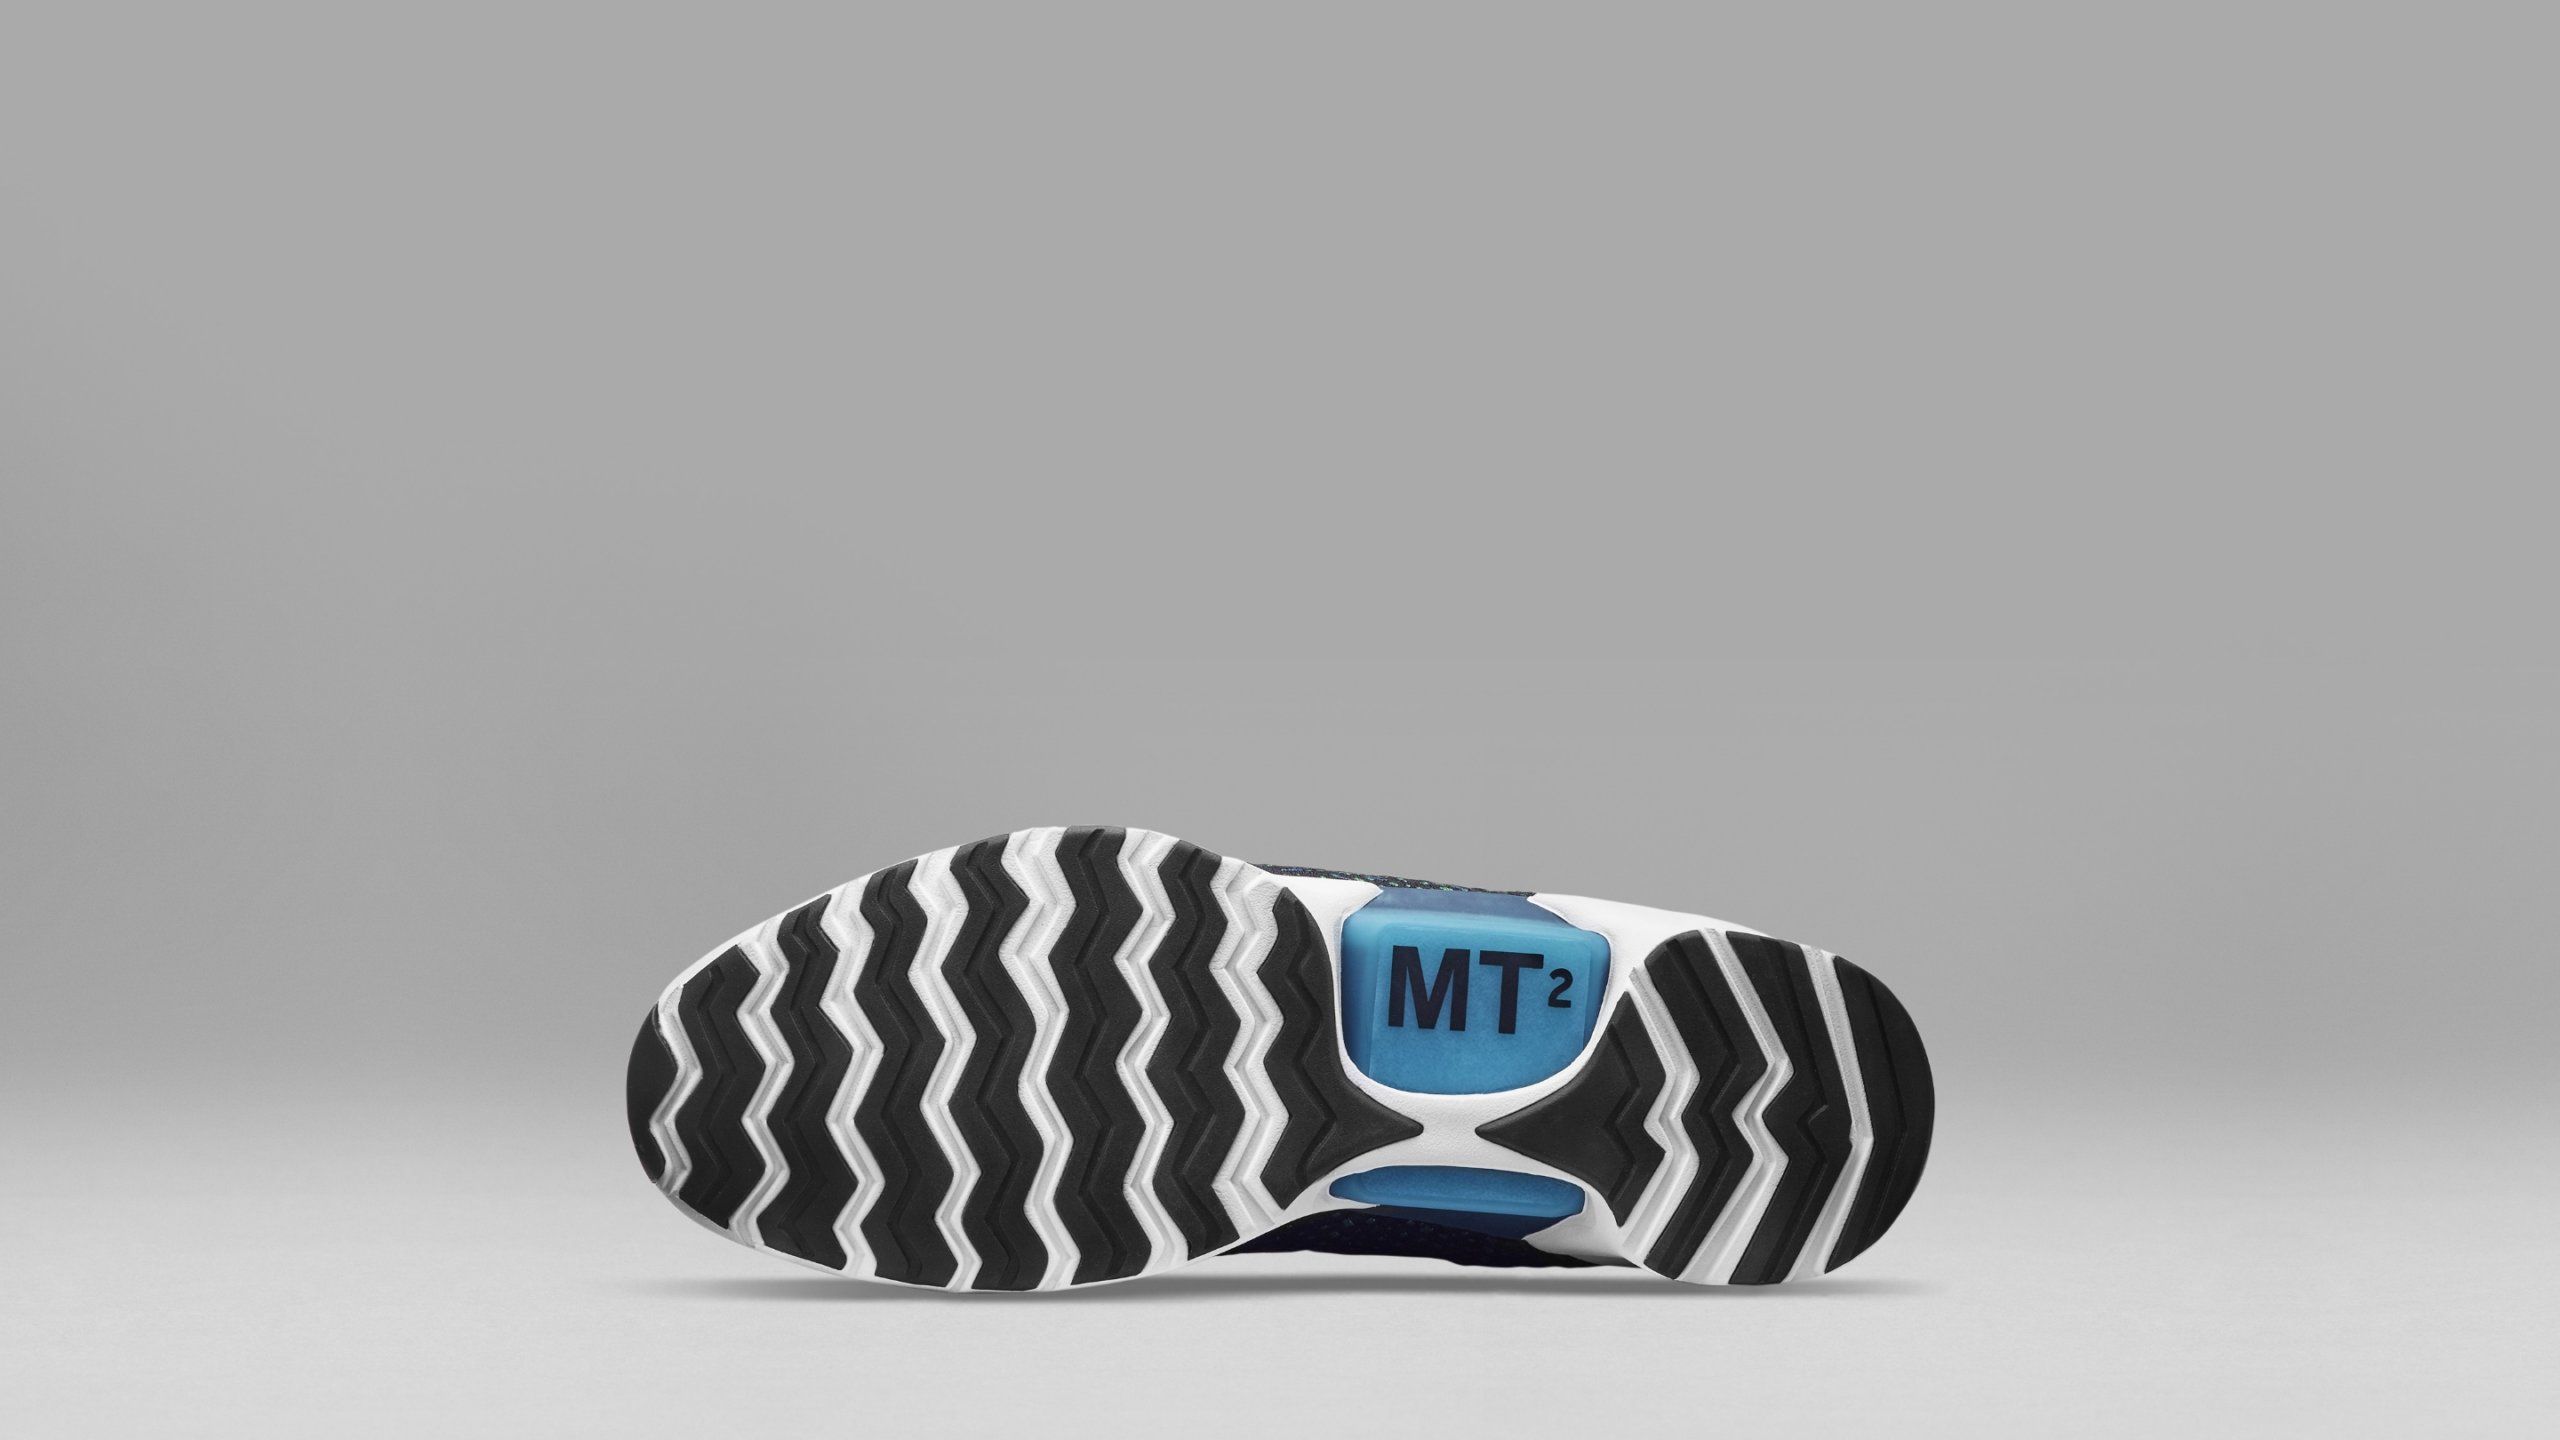 Bottom of Hyper Adapt sneaker showing black and white zig zag tread and MT2 light up arch piece